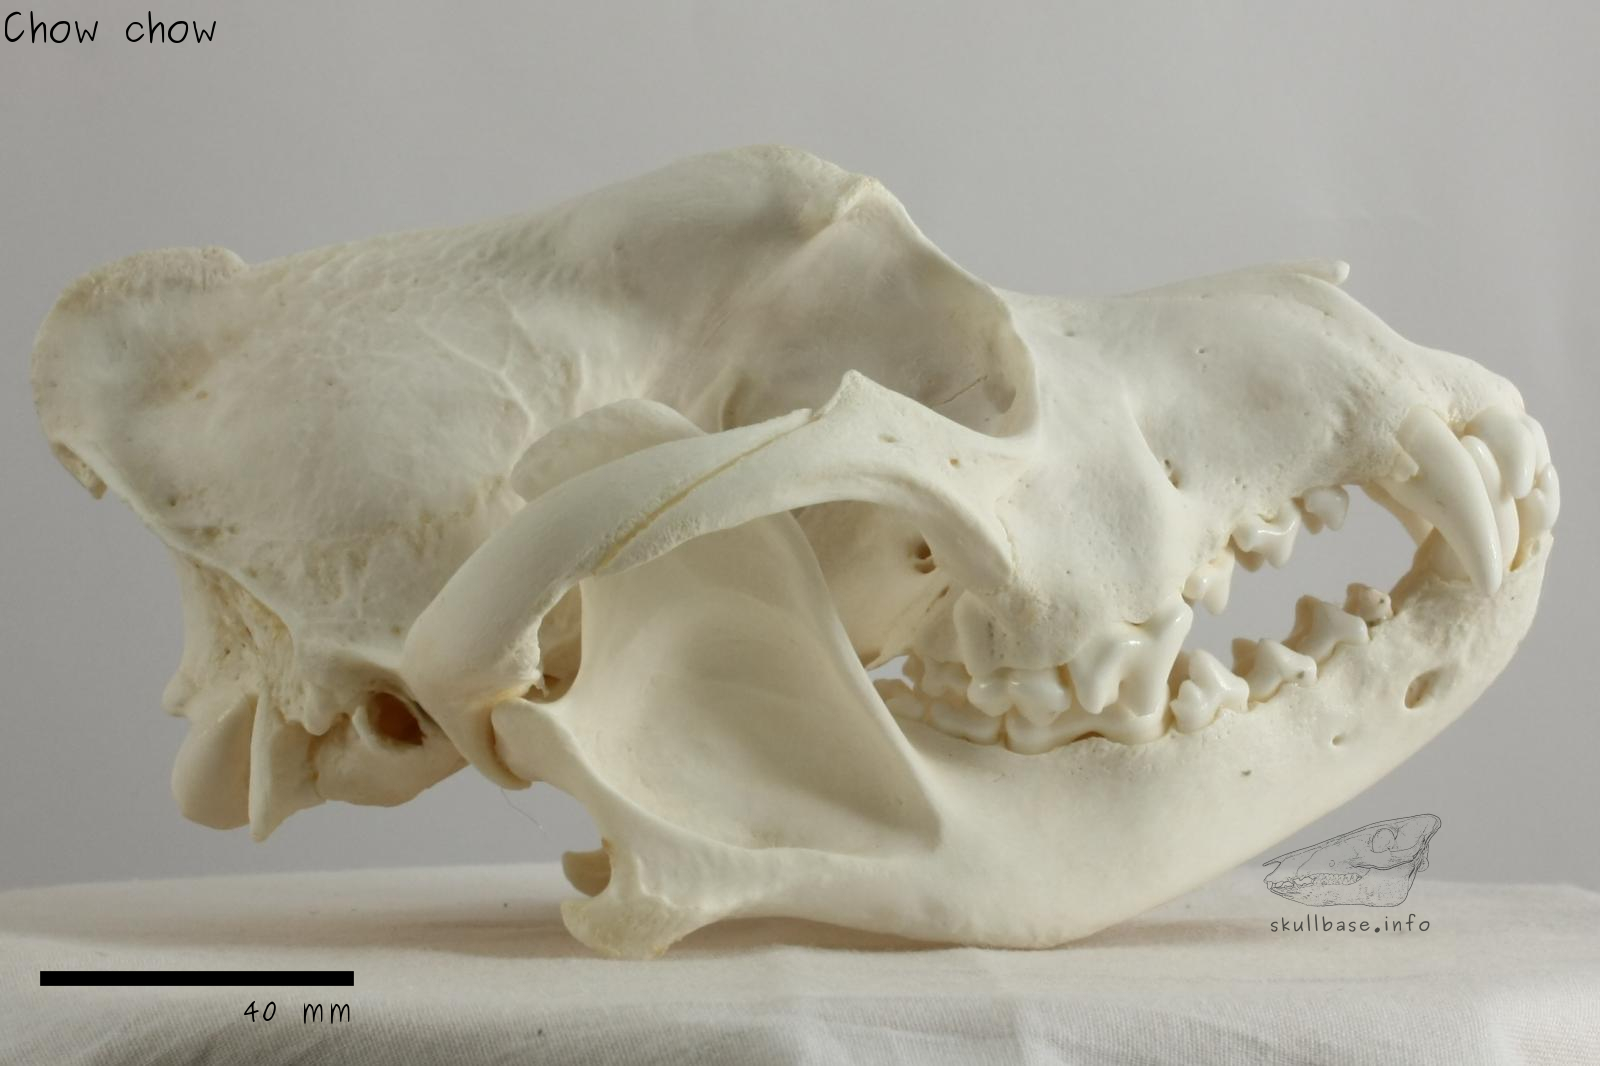 Chow chow (Canis lupus familiaris) skull lateral view